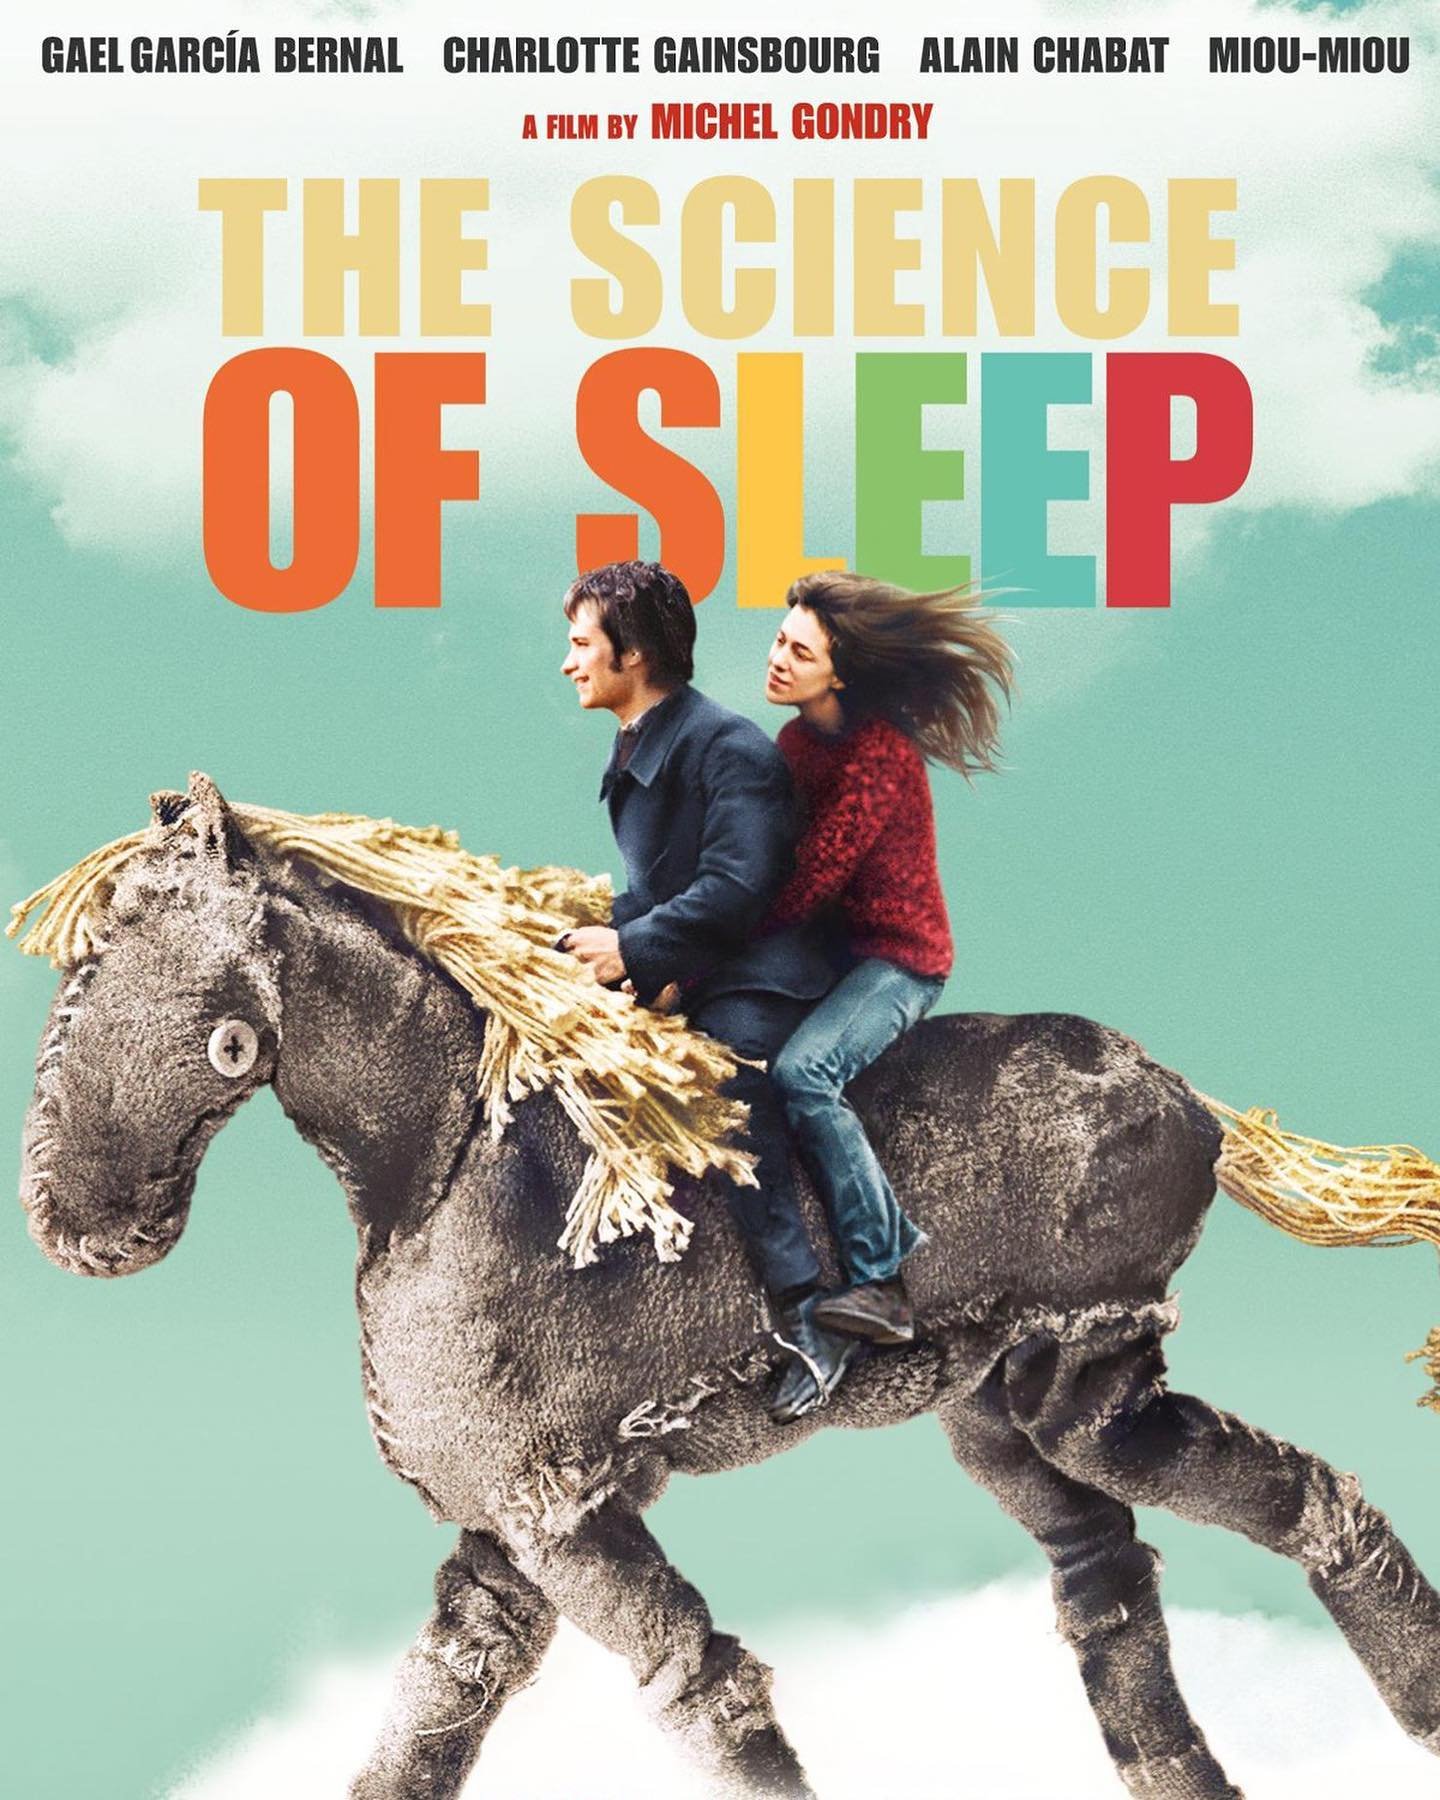 JOIN US THIS FRIDAY for The Science of Sleep! 8:45pm at the DPC amphitheater, 2221 Carpenter. This sweet fantasy sci fi puppet rumination on love and dreams and life by Michel Gondry is a wonderful way to spend a Friday night. Bring chairs or a blank